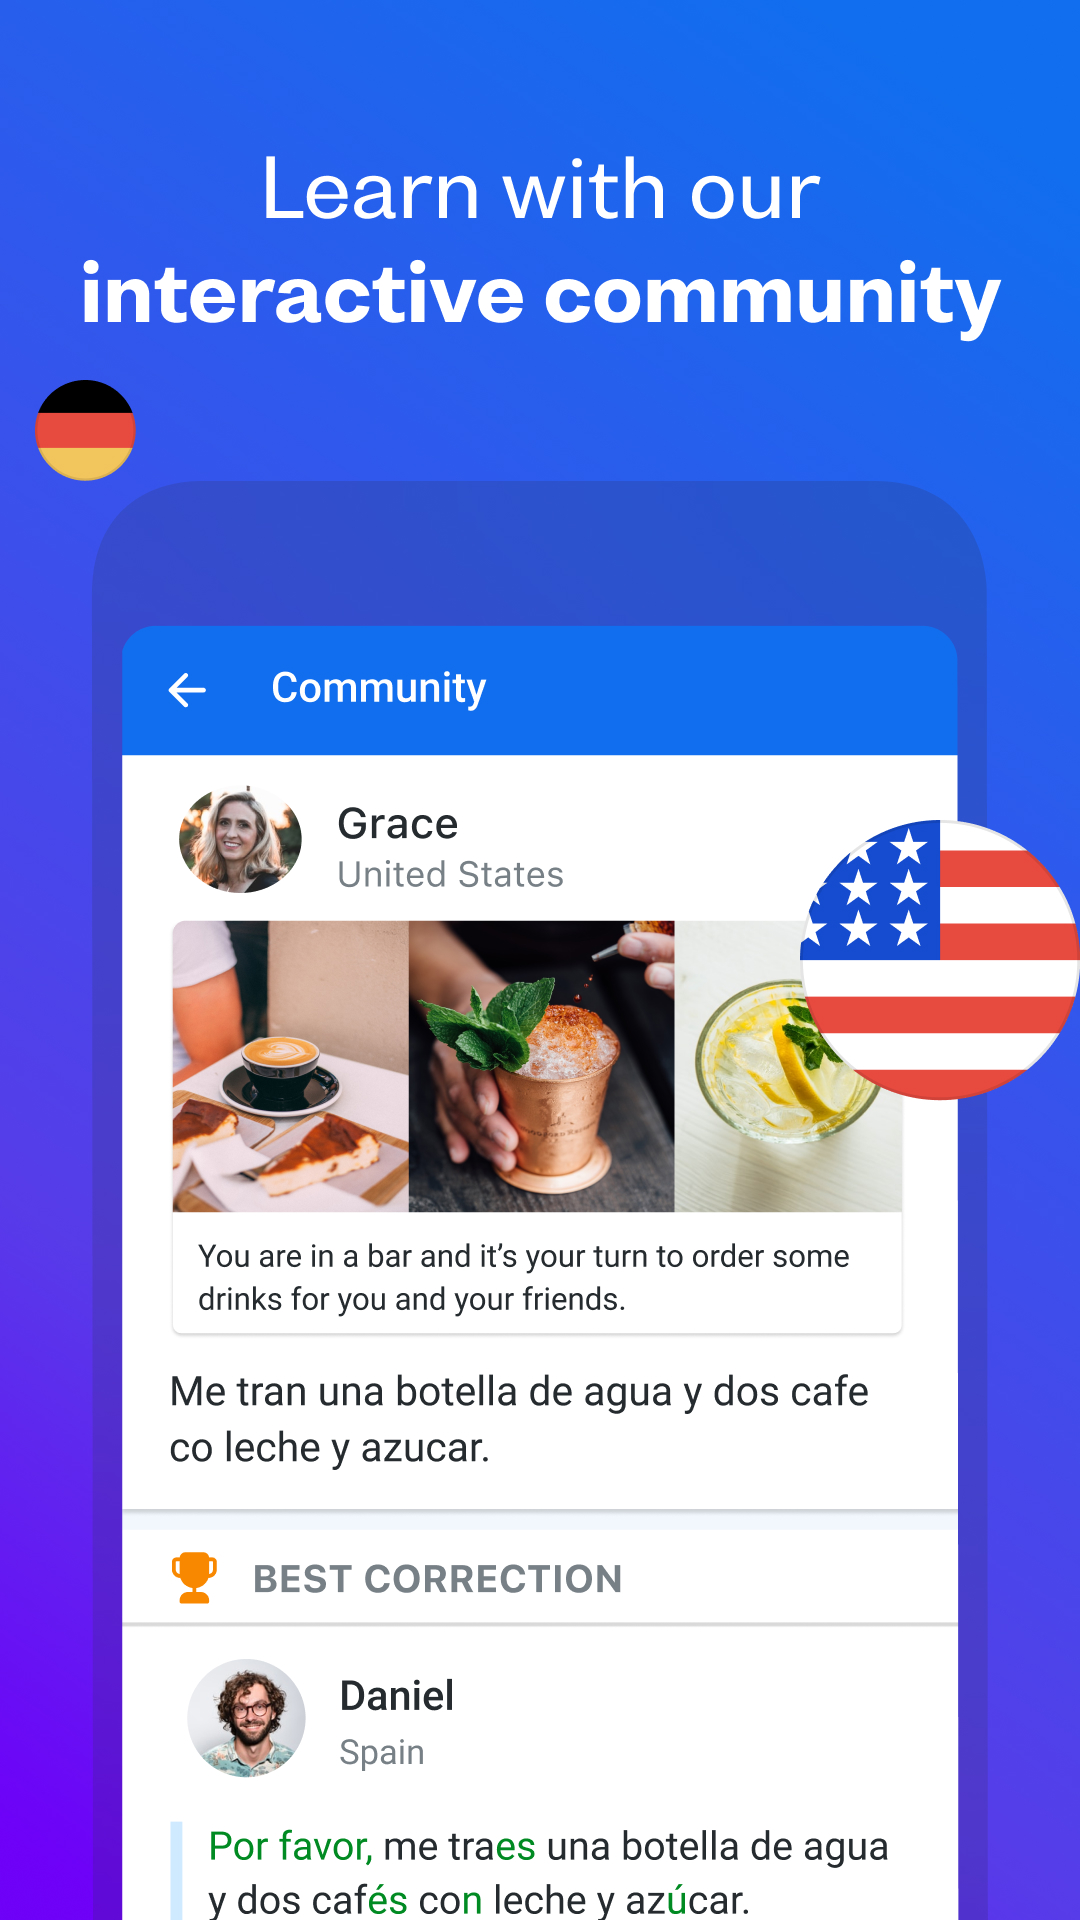 Android application Busuu: Learn Languages screenshort